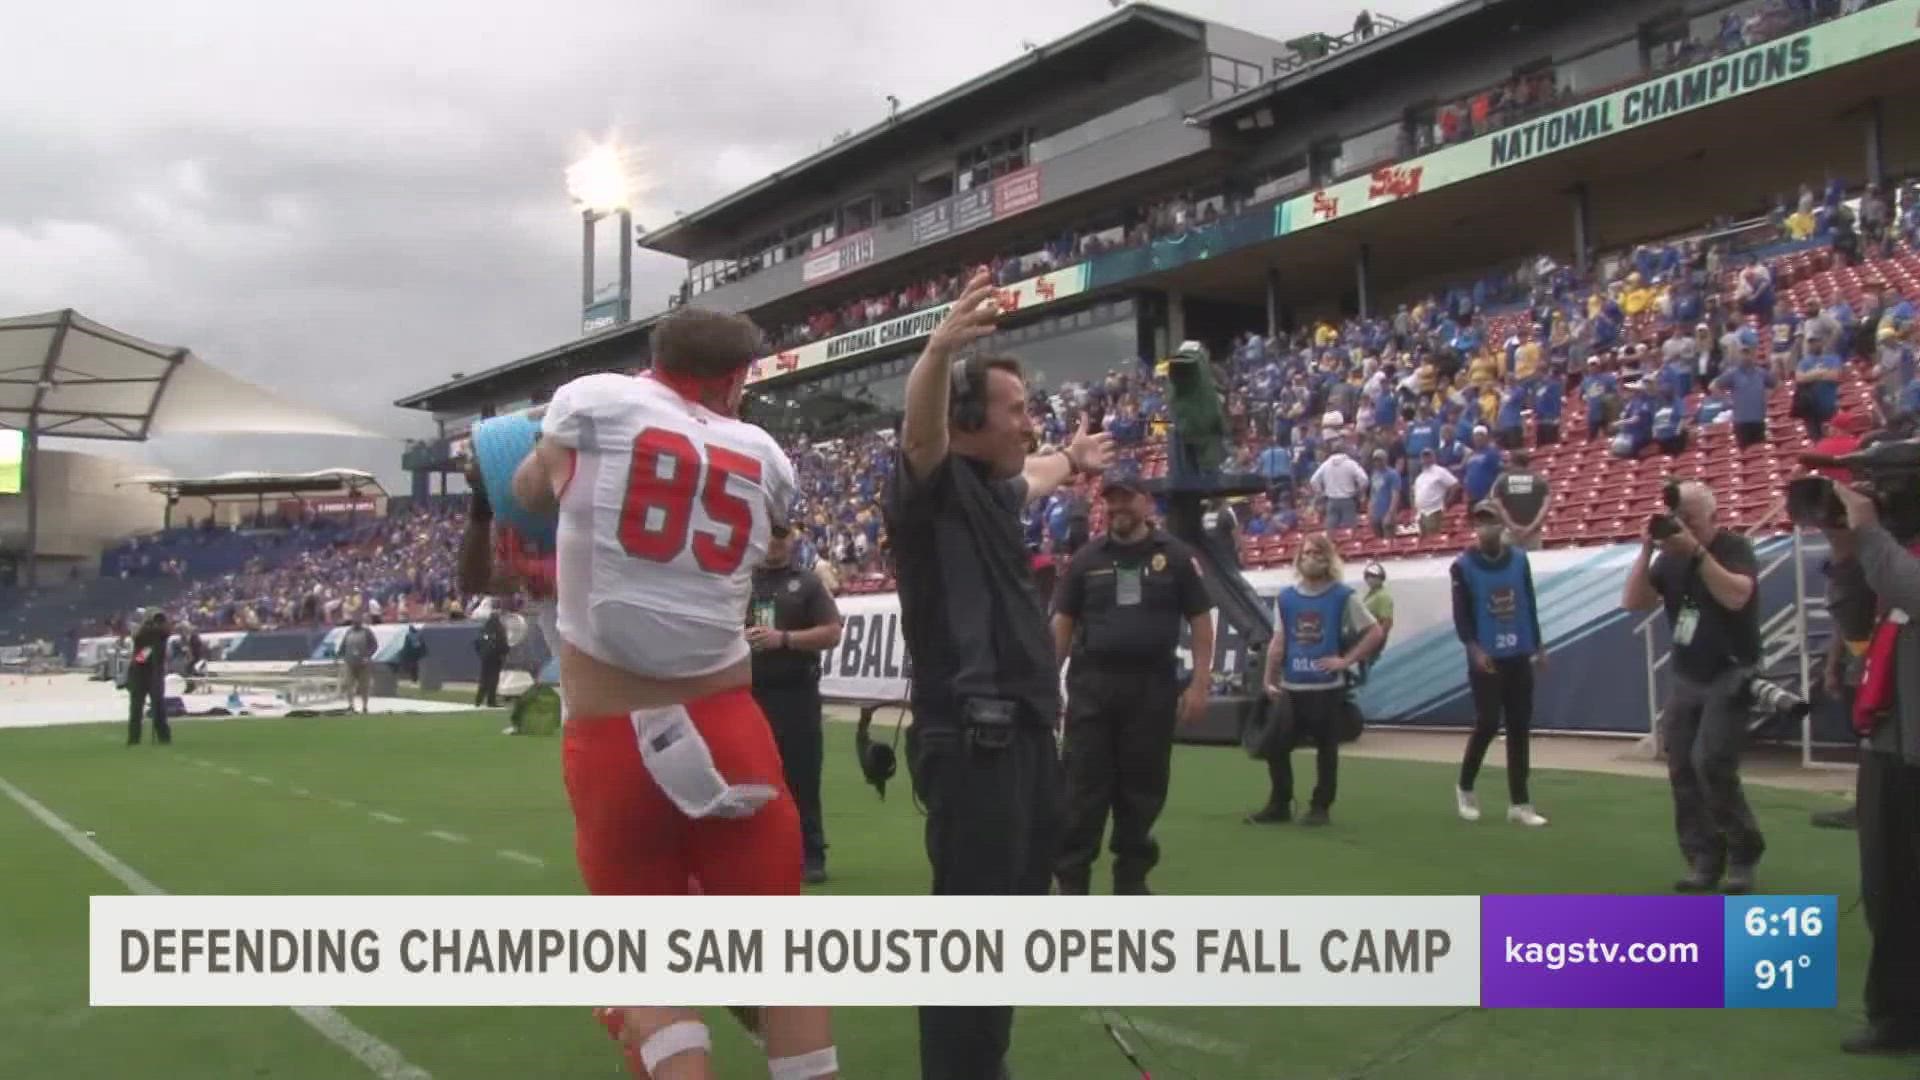 Coming off their first national championship run in program history, Sam Houston opened fall camp on Wednesday morning. The Bearkats return every starter.